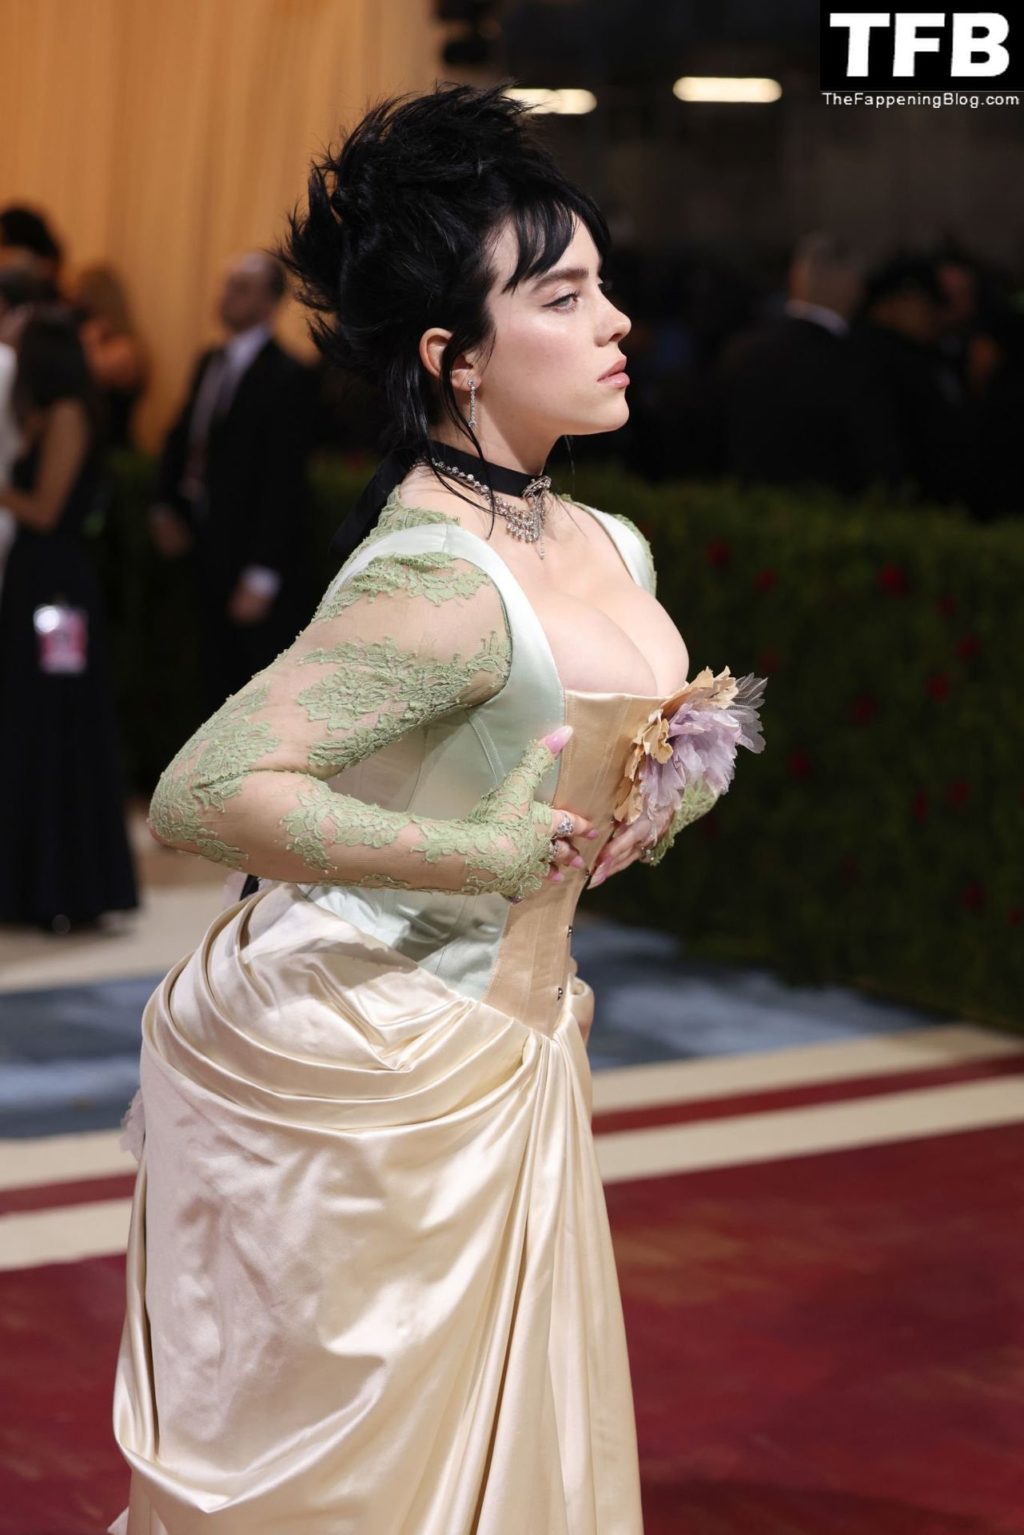 Billie Eilish Sexy The Fappening Blog 58 1024x1535 - Billie Eilish Showcases Nice Cleavage at The 2022 Met Gala in NYC (155 Photos)